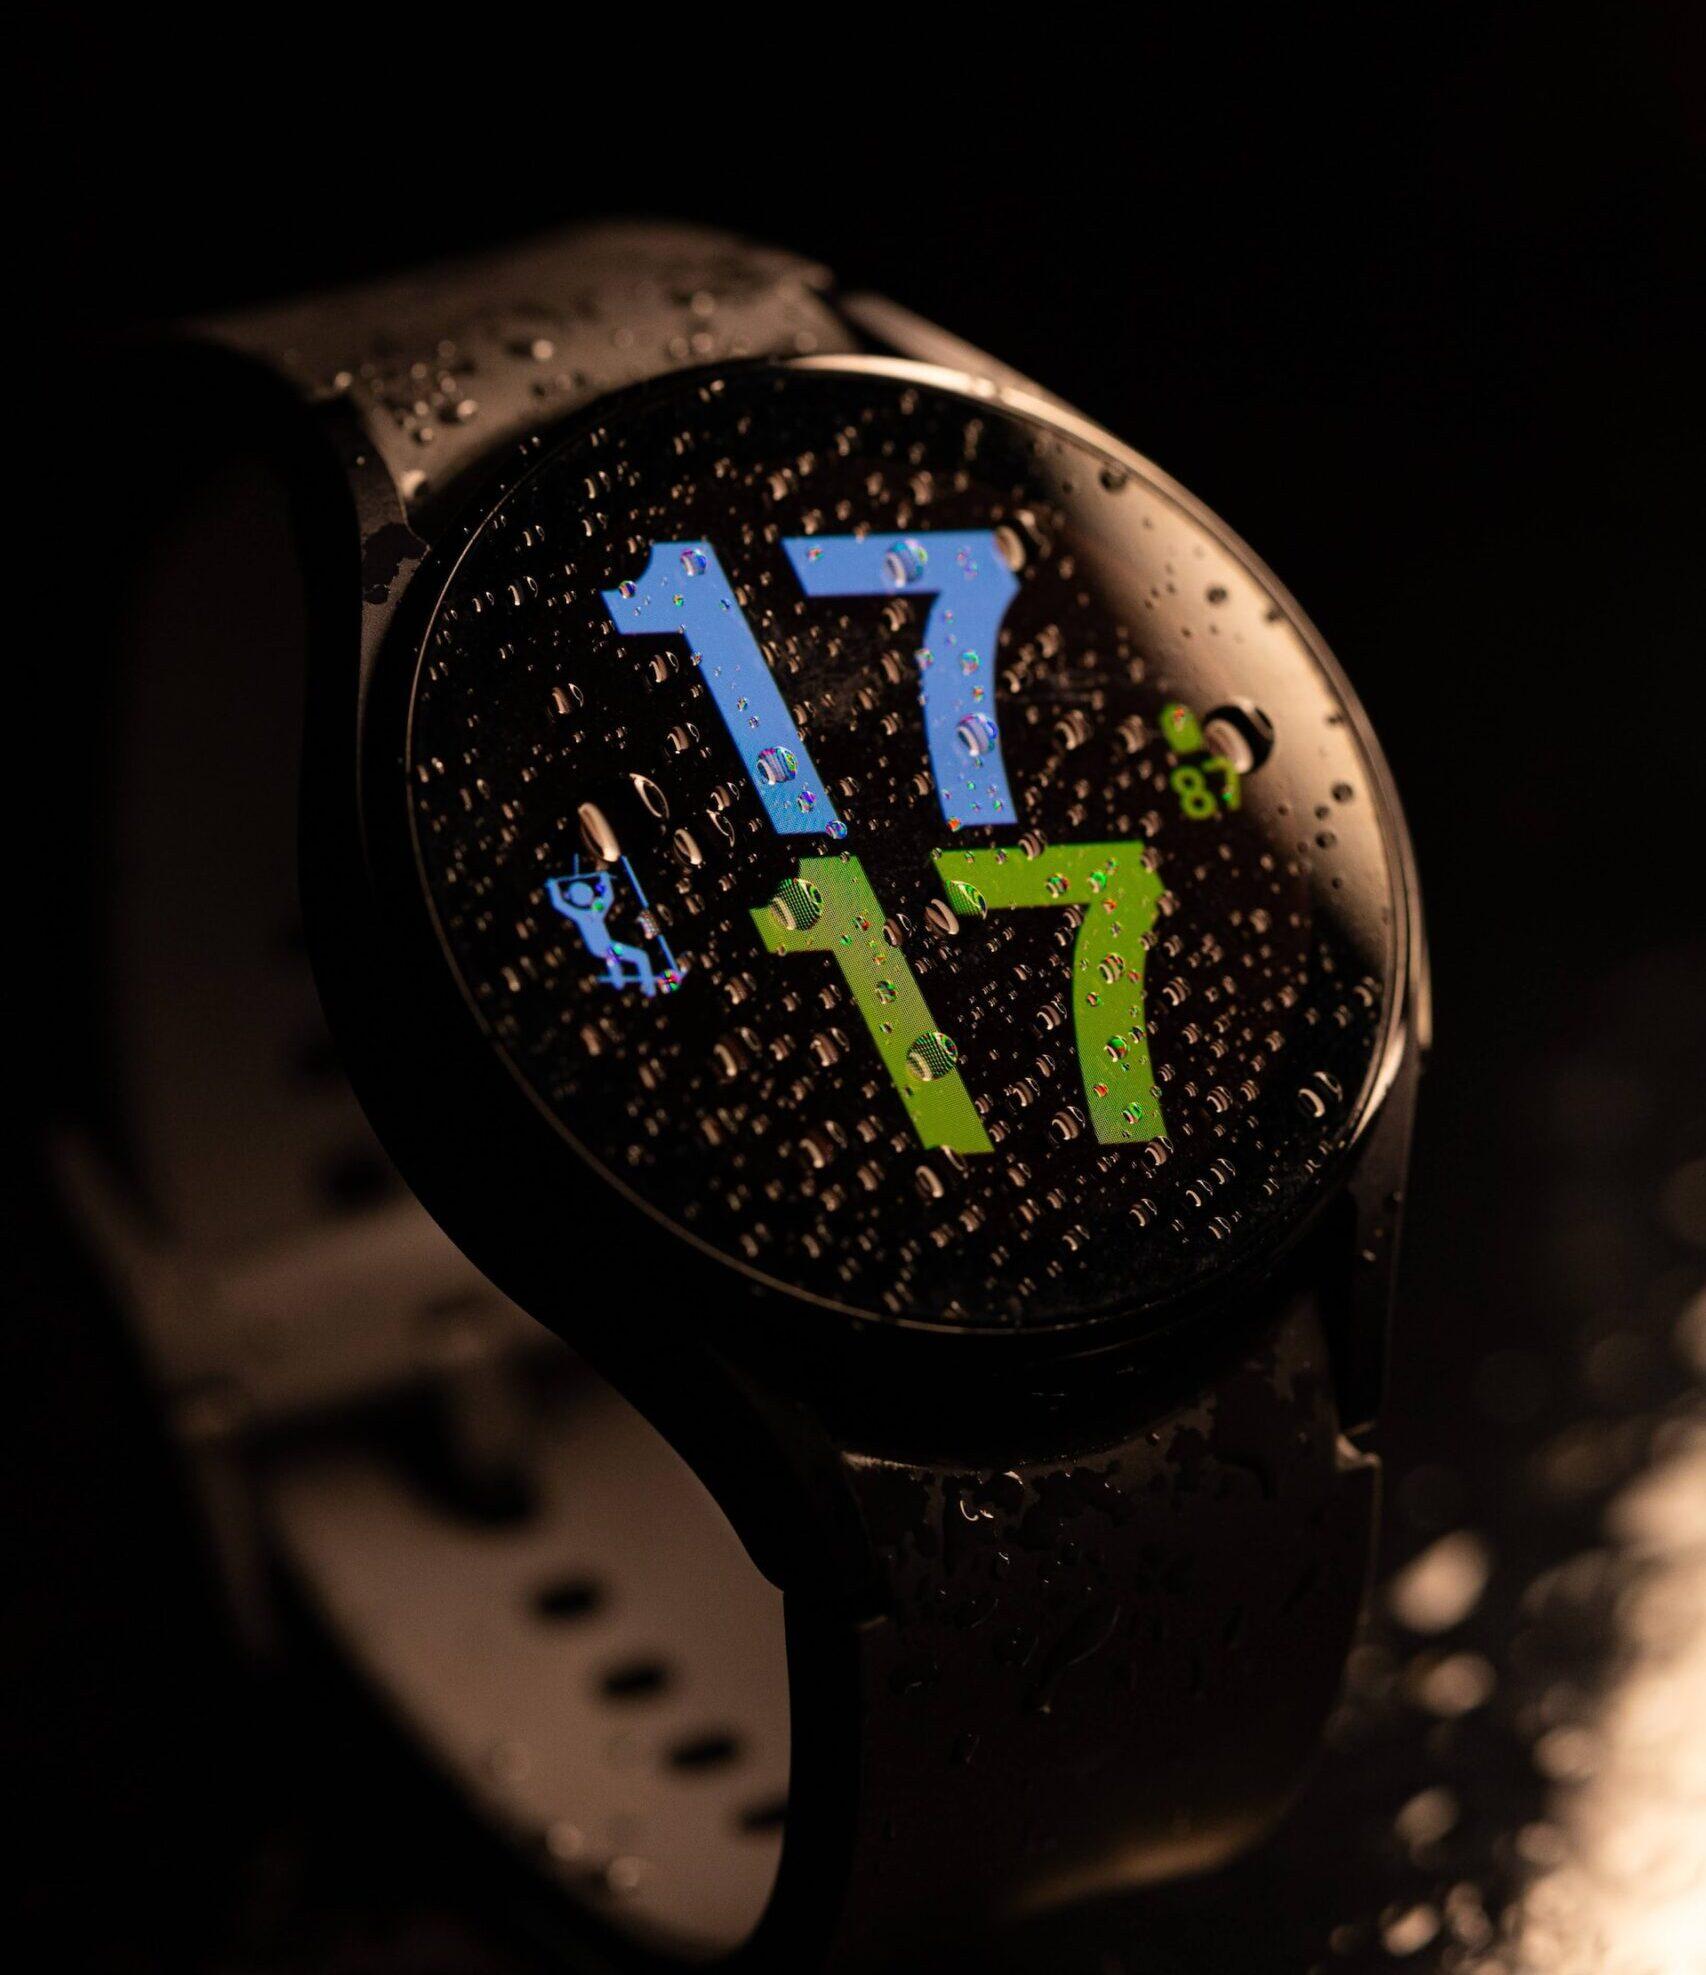 How to Change Watch Face on Samsung Galaxy Watch 4